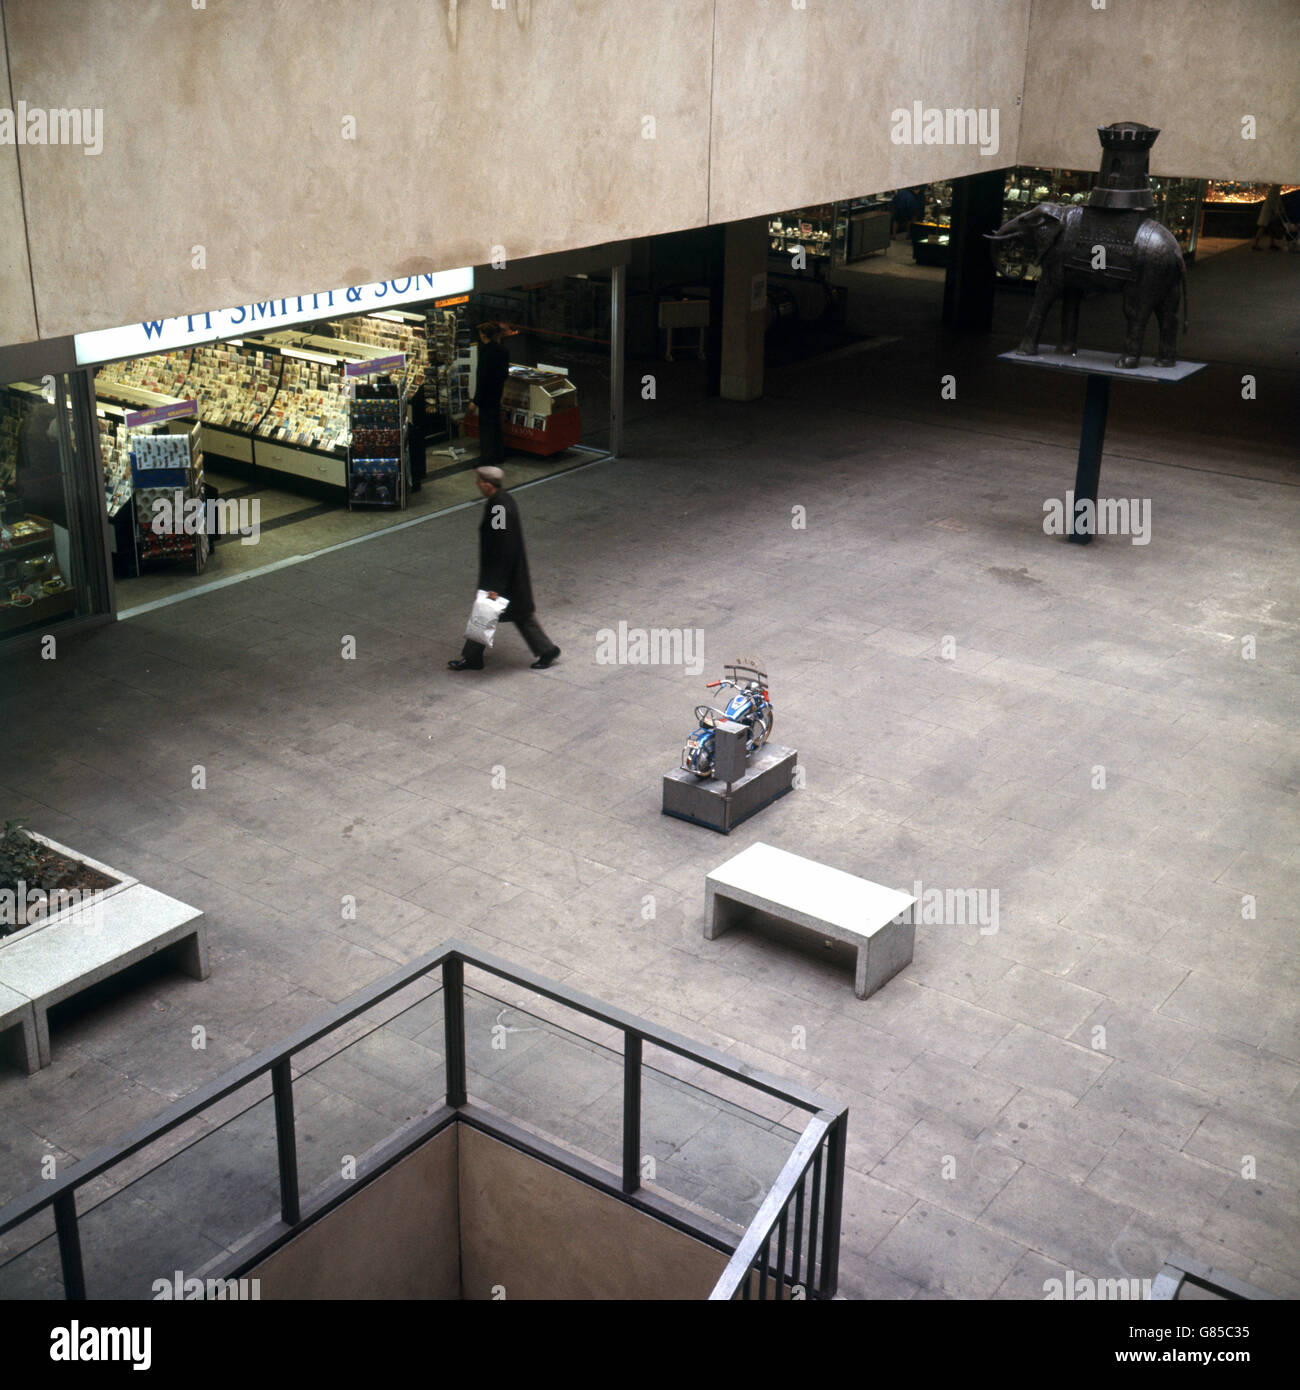 Interior shot of the shopping centre, part of the redevelopment scheme in Elephant & Castle, London. Images show a statue if an Elephant. Stock Photo